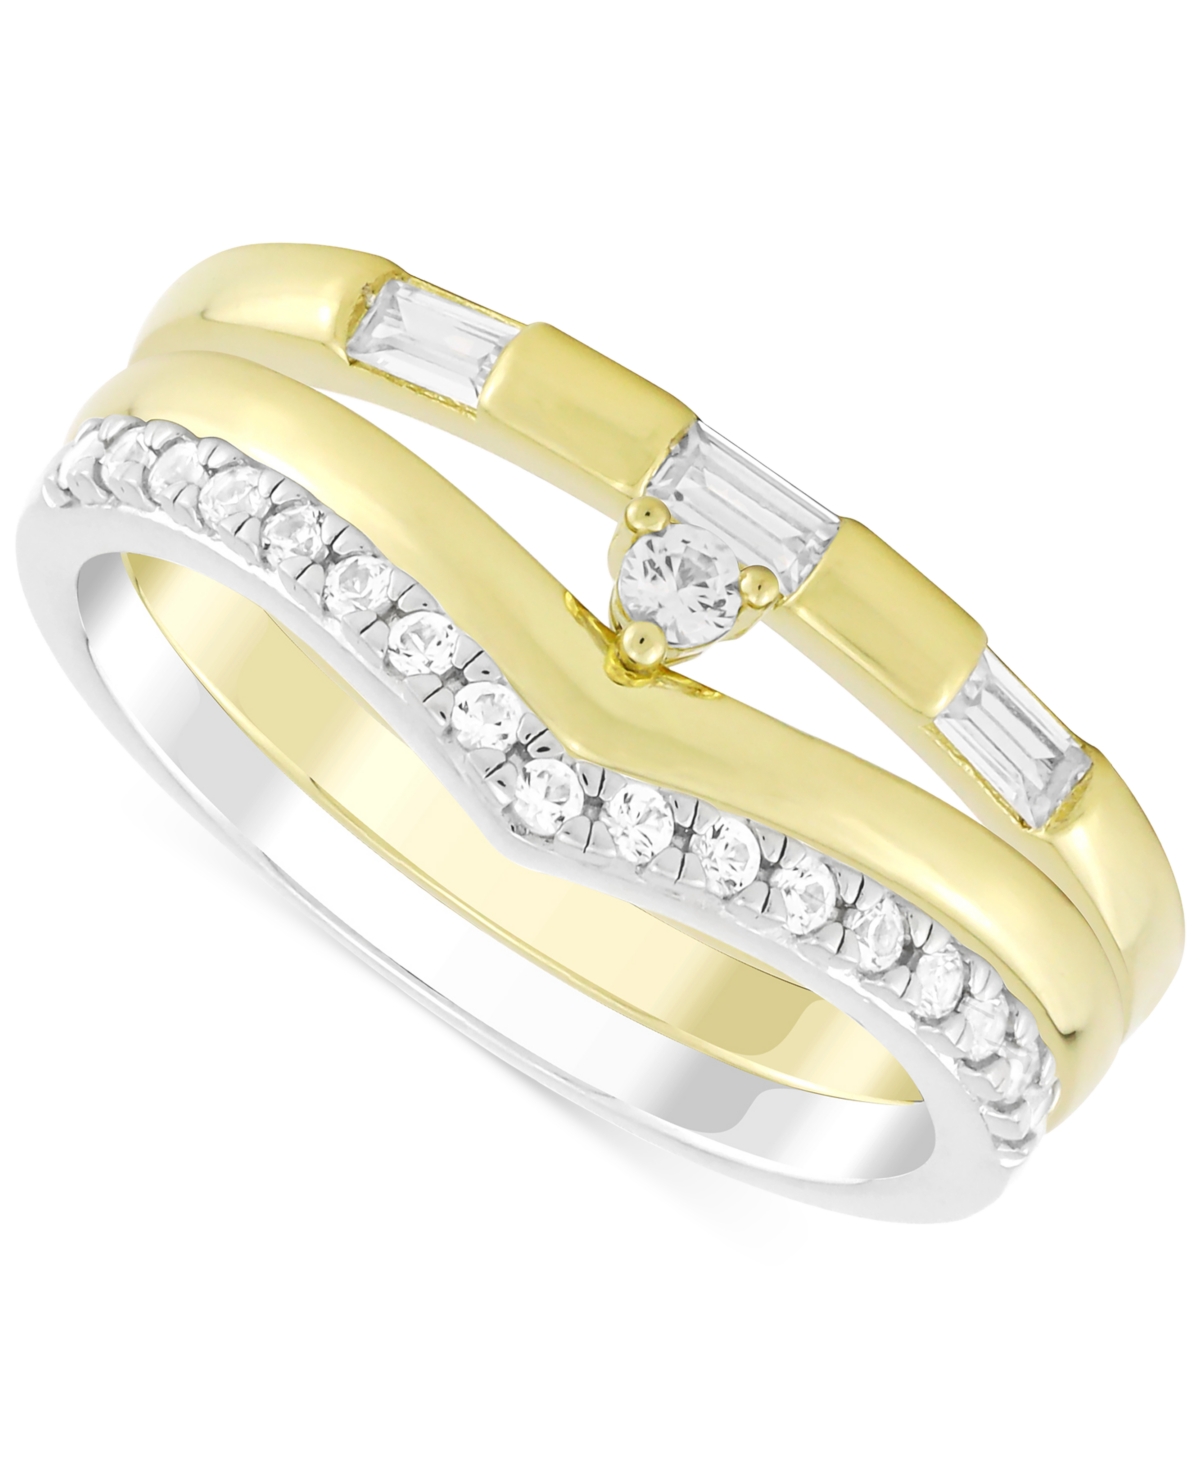 3-Pc. Set Lab-Grown White Sapphire Stack Rings (3/8 ct. t.w.) in Sterling Silver & 14k Gold-Plate - White Sapphire